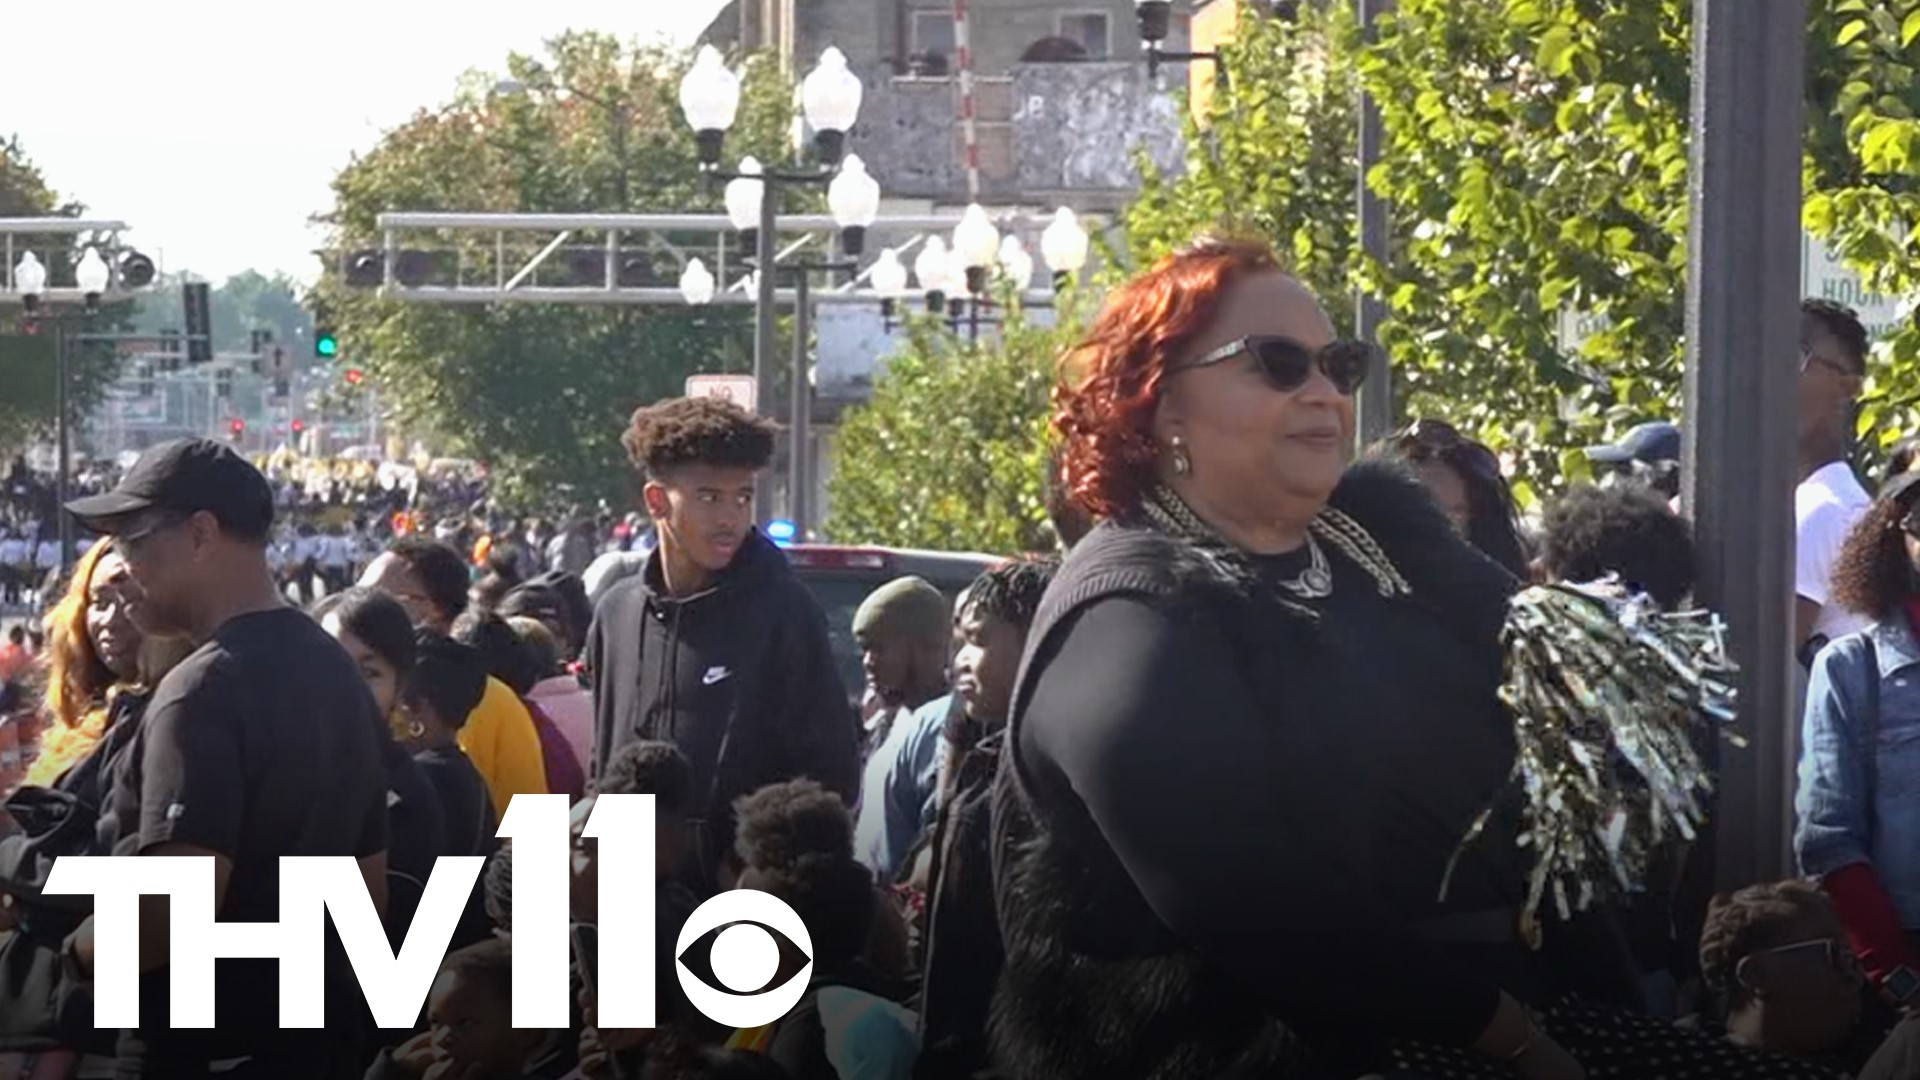 It’s another year of celebrating tradition in the City of Pine Bluff as the community gathered for UAPB's annual homecoming weekend.